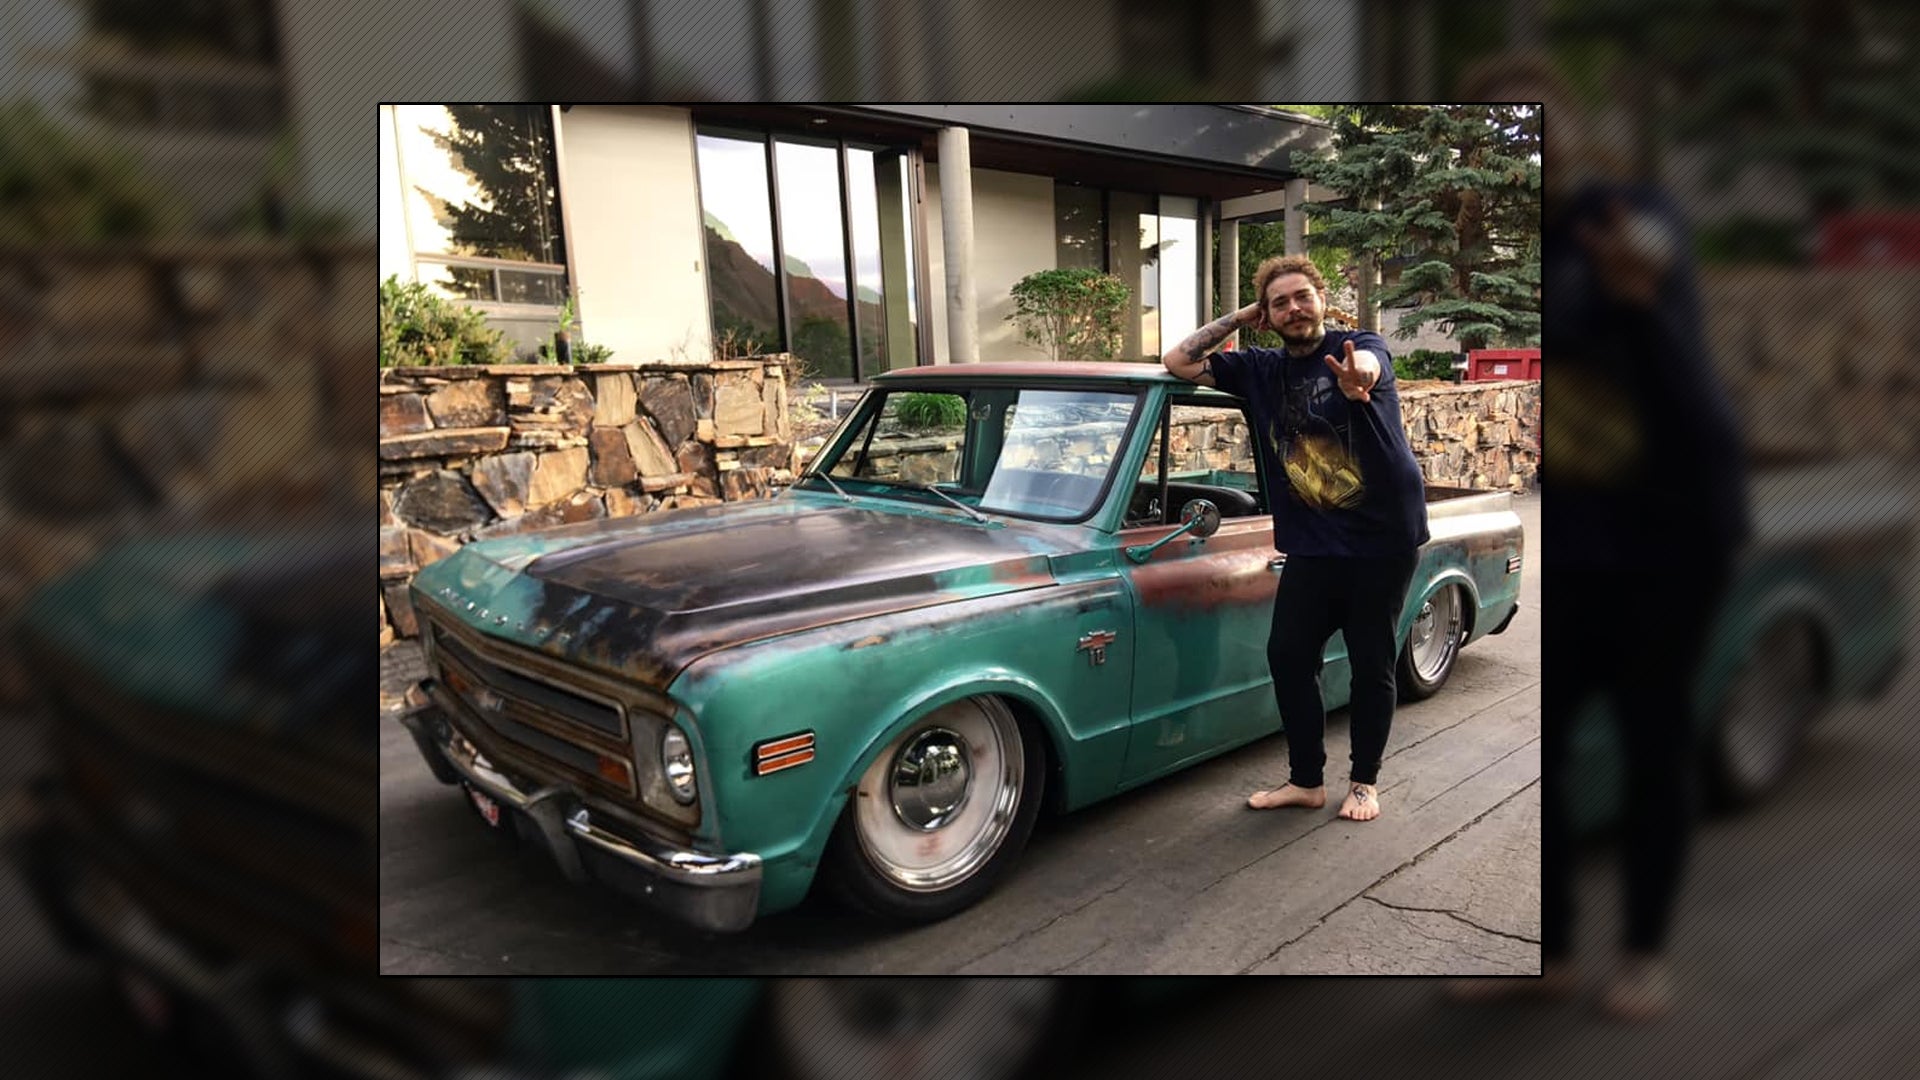 Post Malone Adds Bagged, LS-Swapped 1968 Chevy C10 to Ballin’ Collection